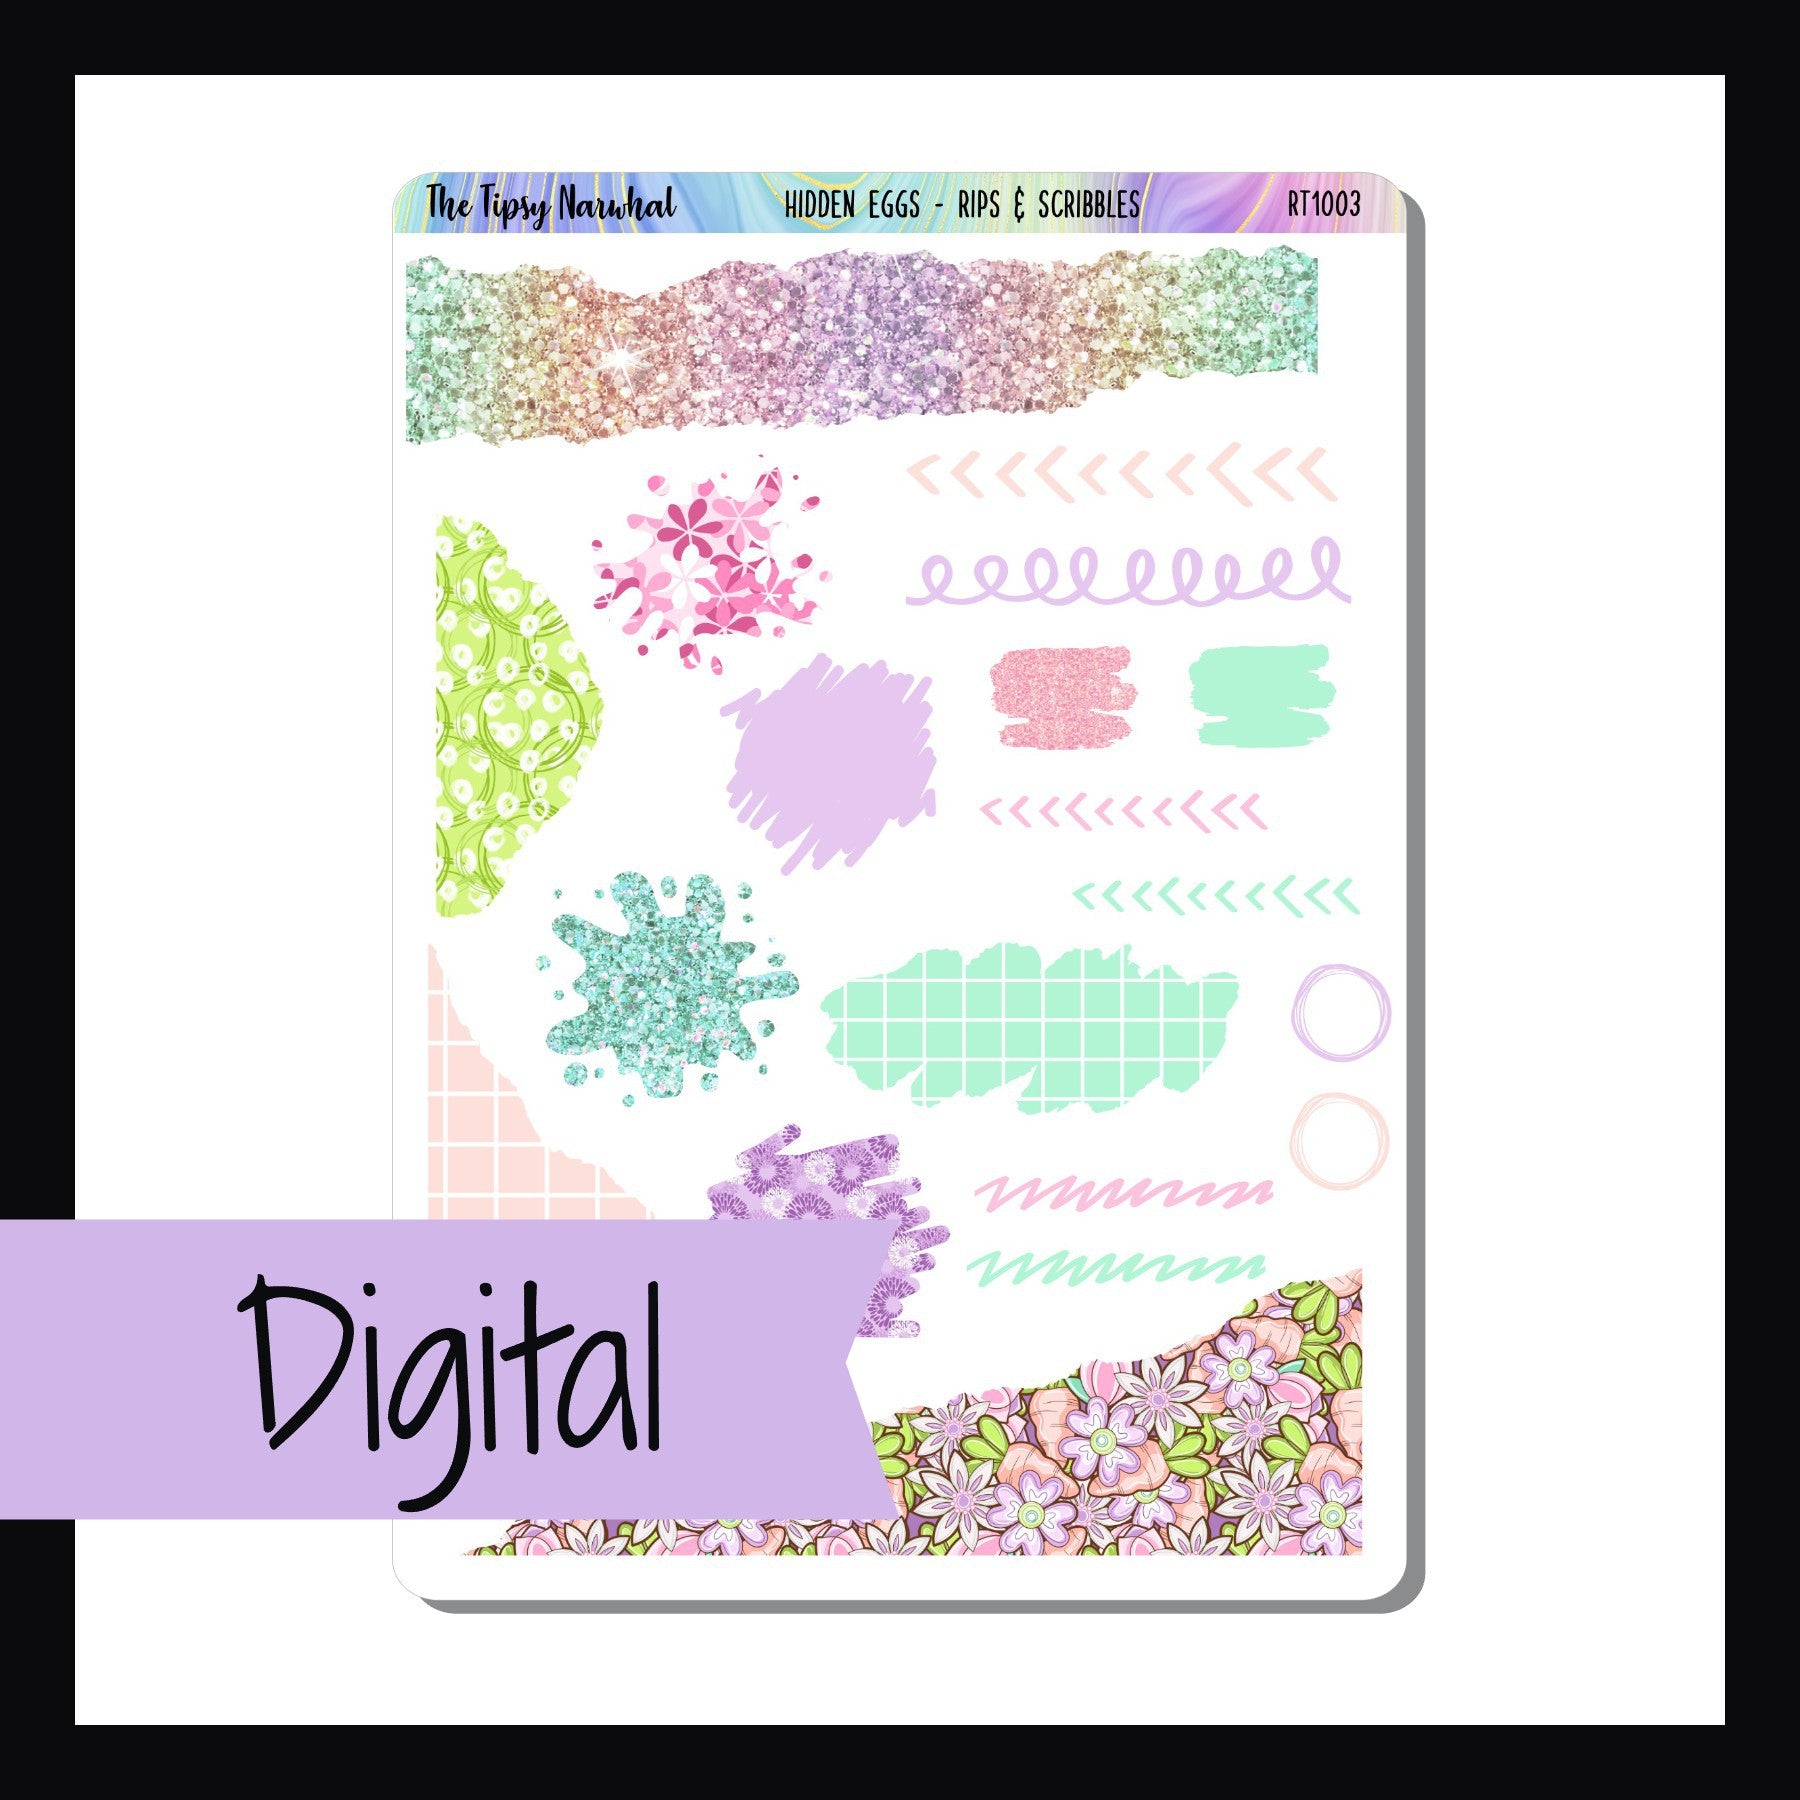 Digital Hidden Eggs Rips & Scribbles sheet features abstract stickers that match the Hidden Eggs sticker kits.  Contains ripped appearance stickers, paint splatters, brush stroke stickers and some doodle stickers.